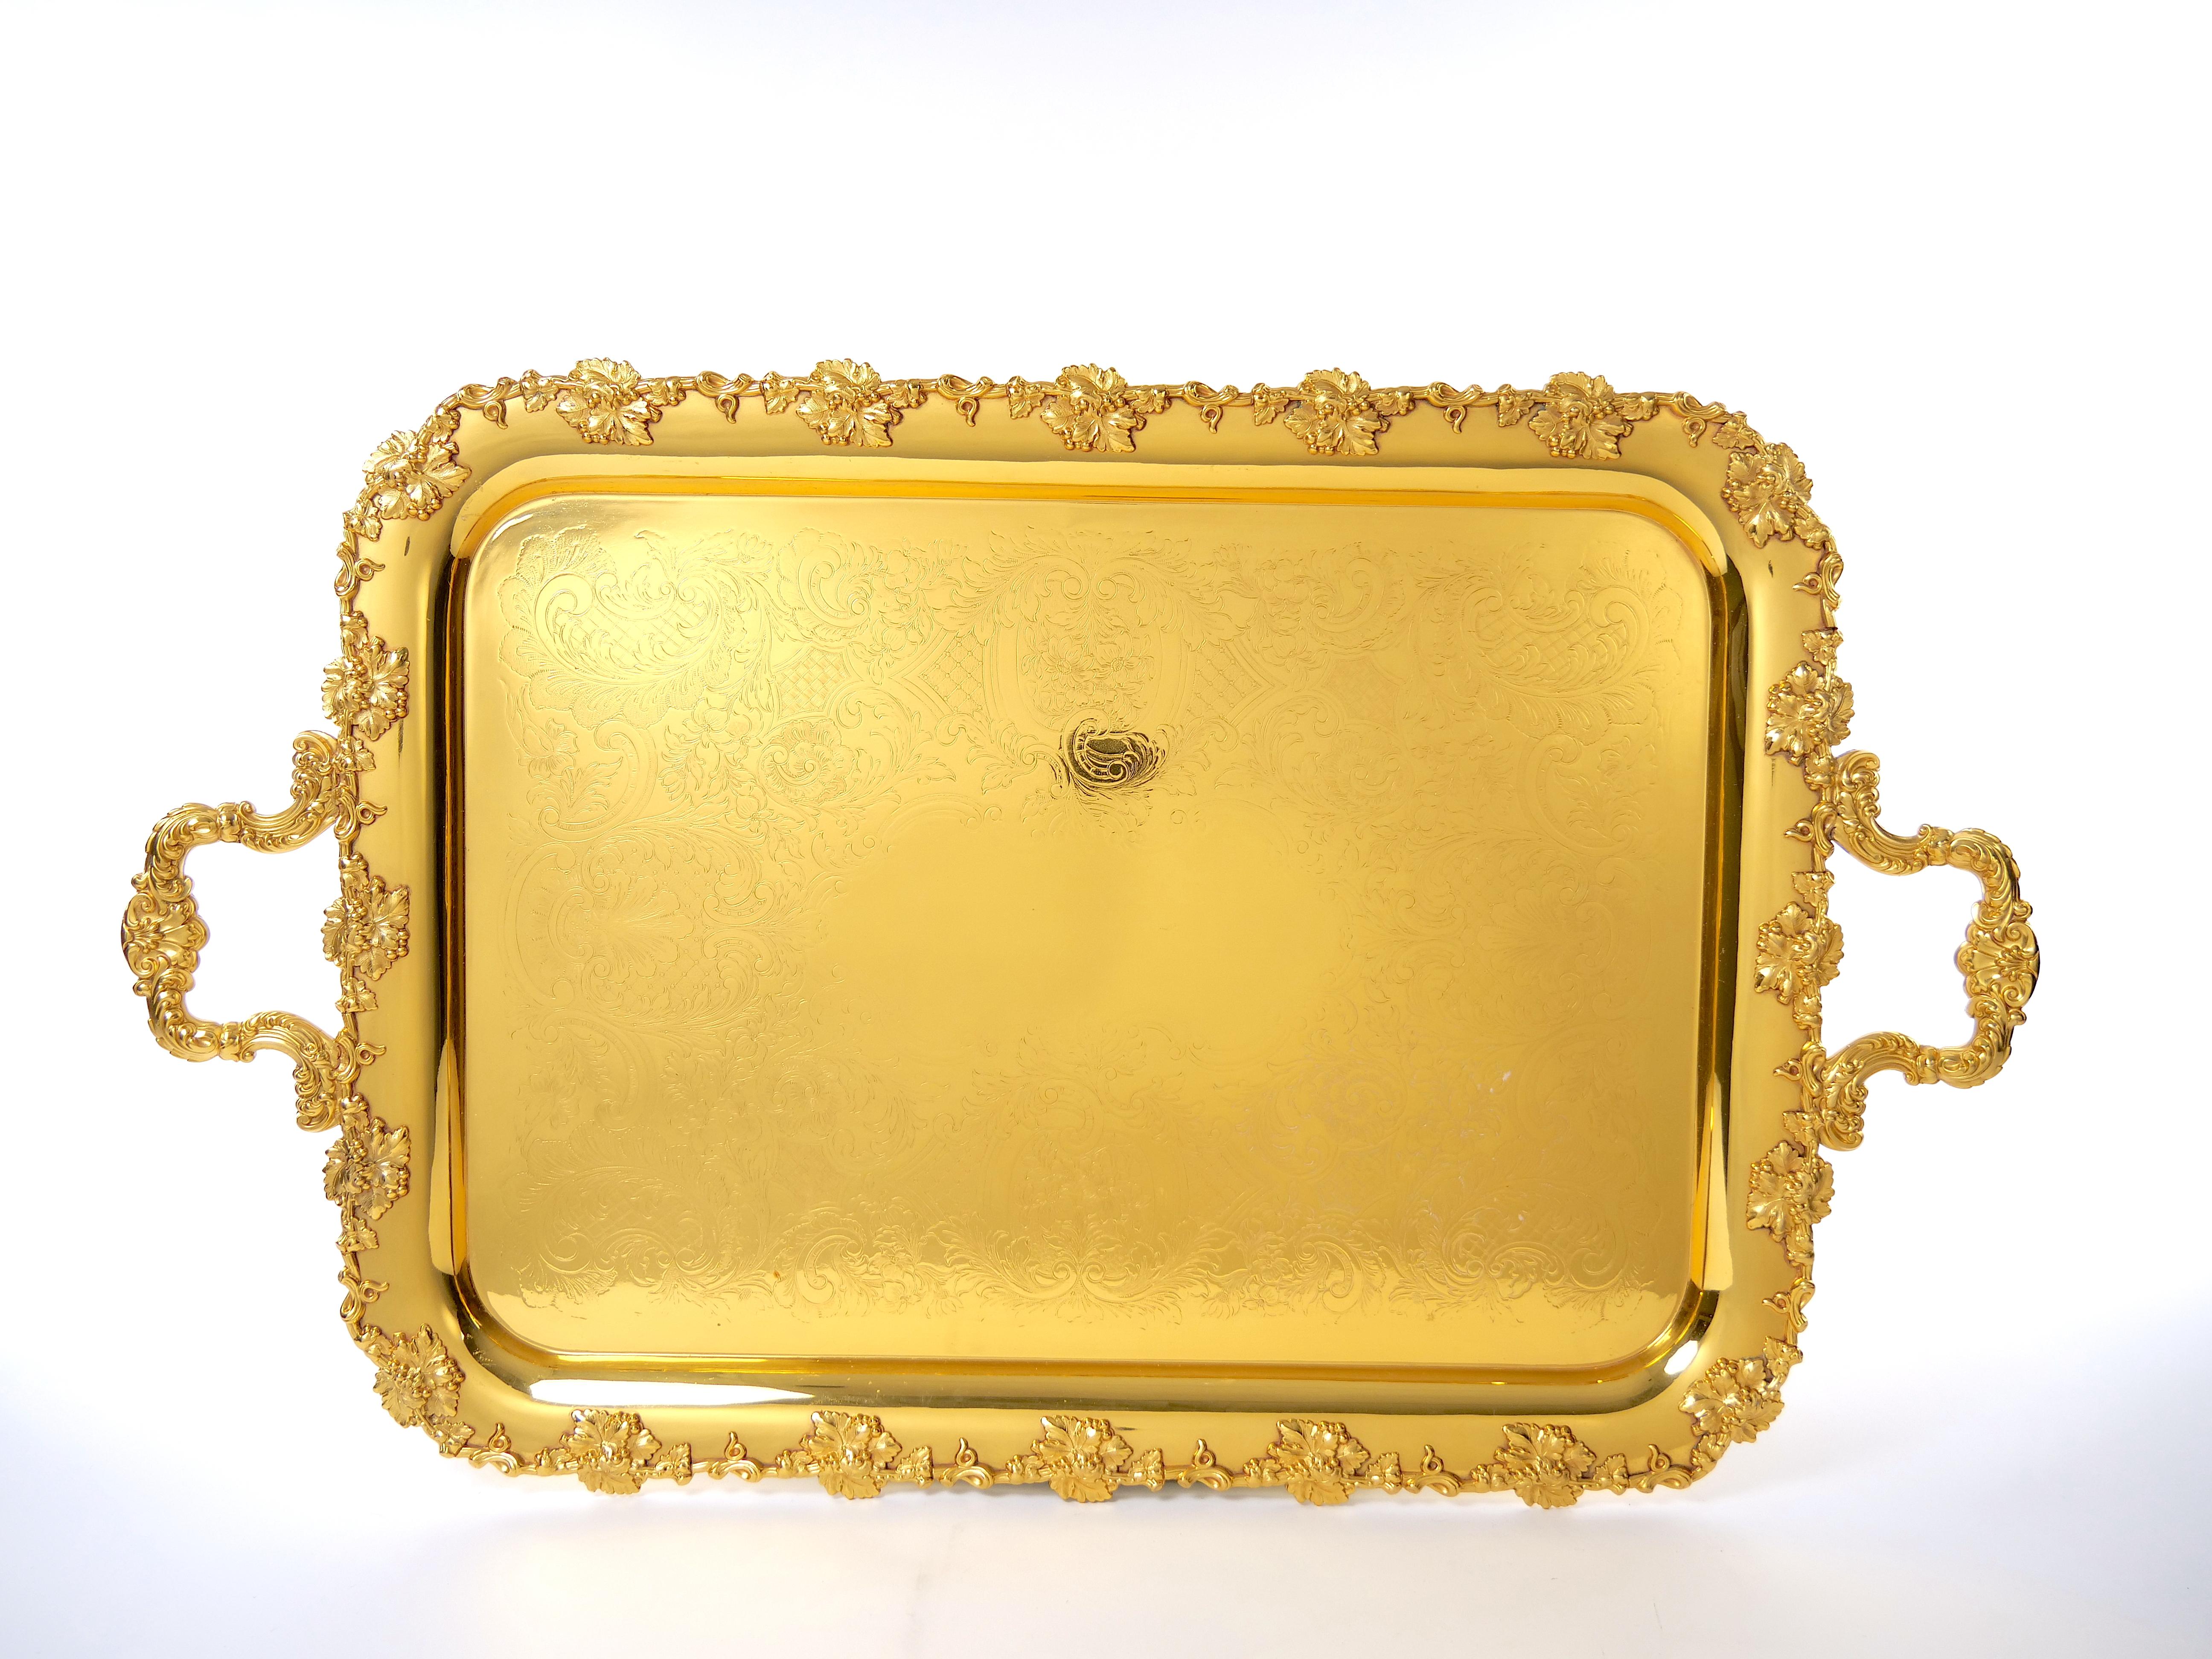 Indulge in the opulence and elevate your dining experience with our magnificent and resplendent Georgian-style serving tray. This awe-inspiring masterpiece is a testament to craftsmanship and refinement, expertly designed to captivate the senses.